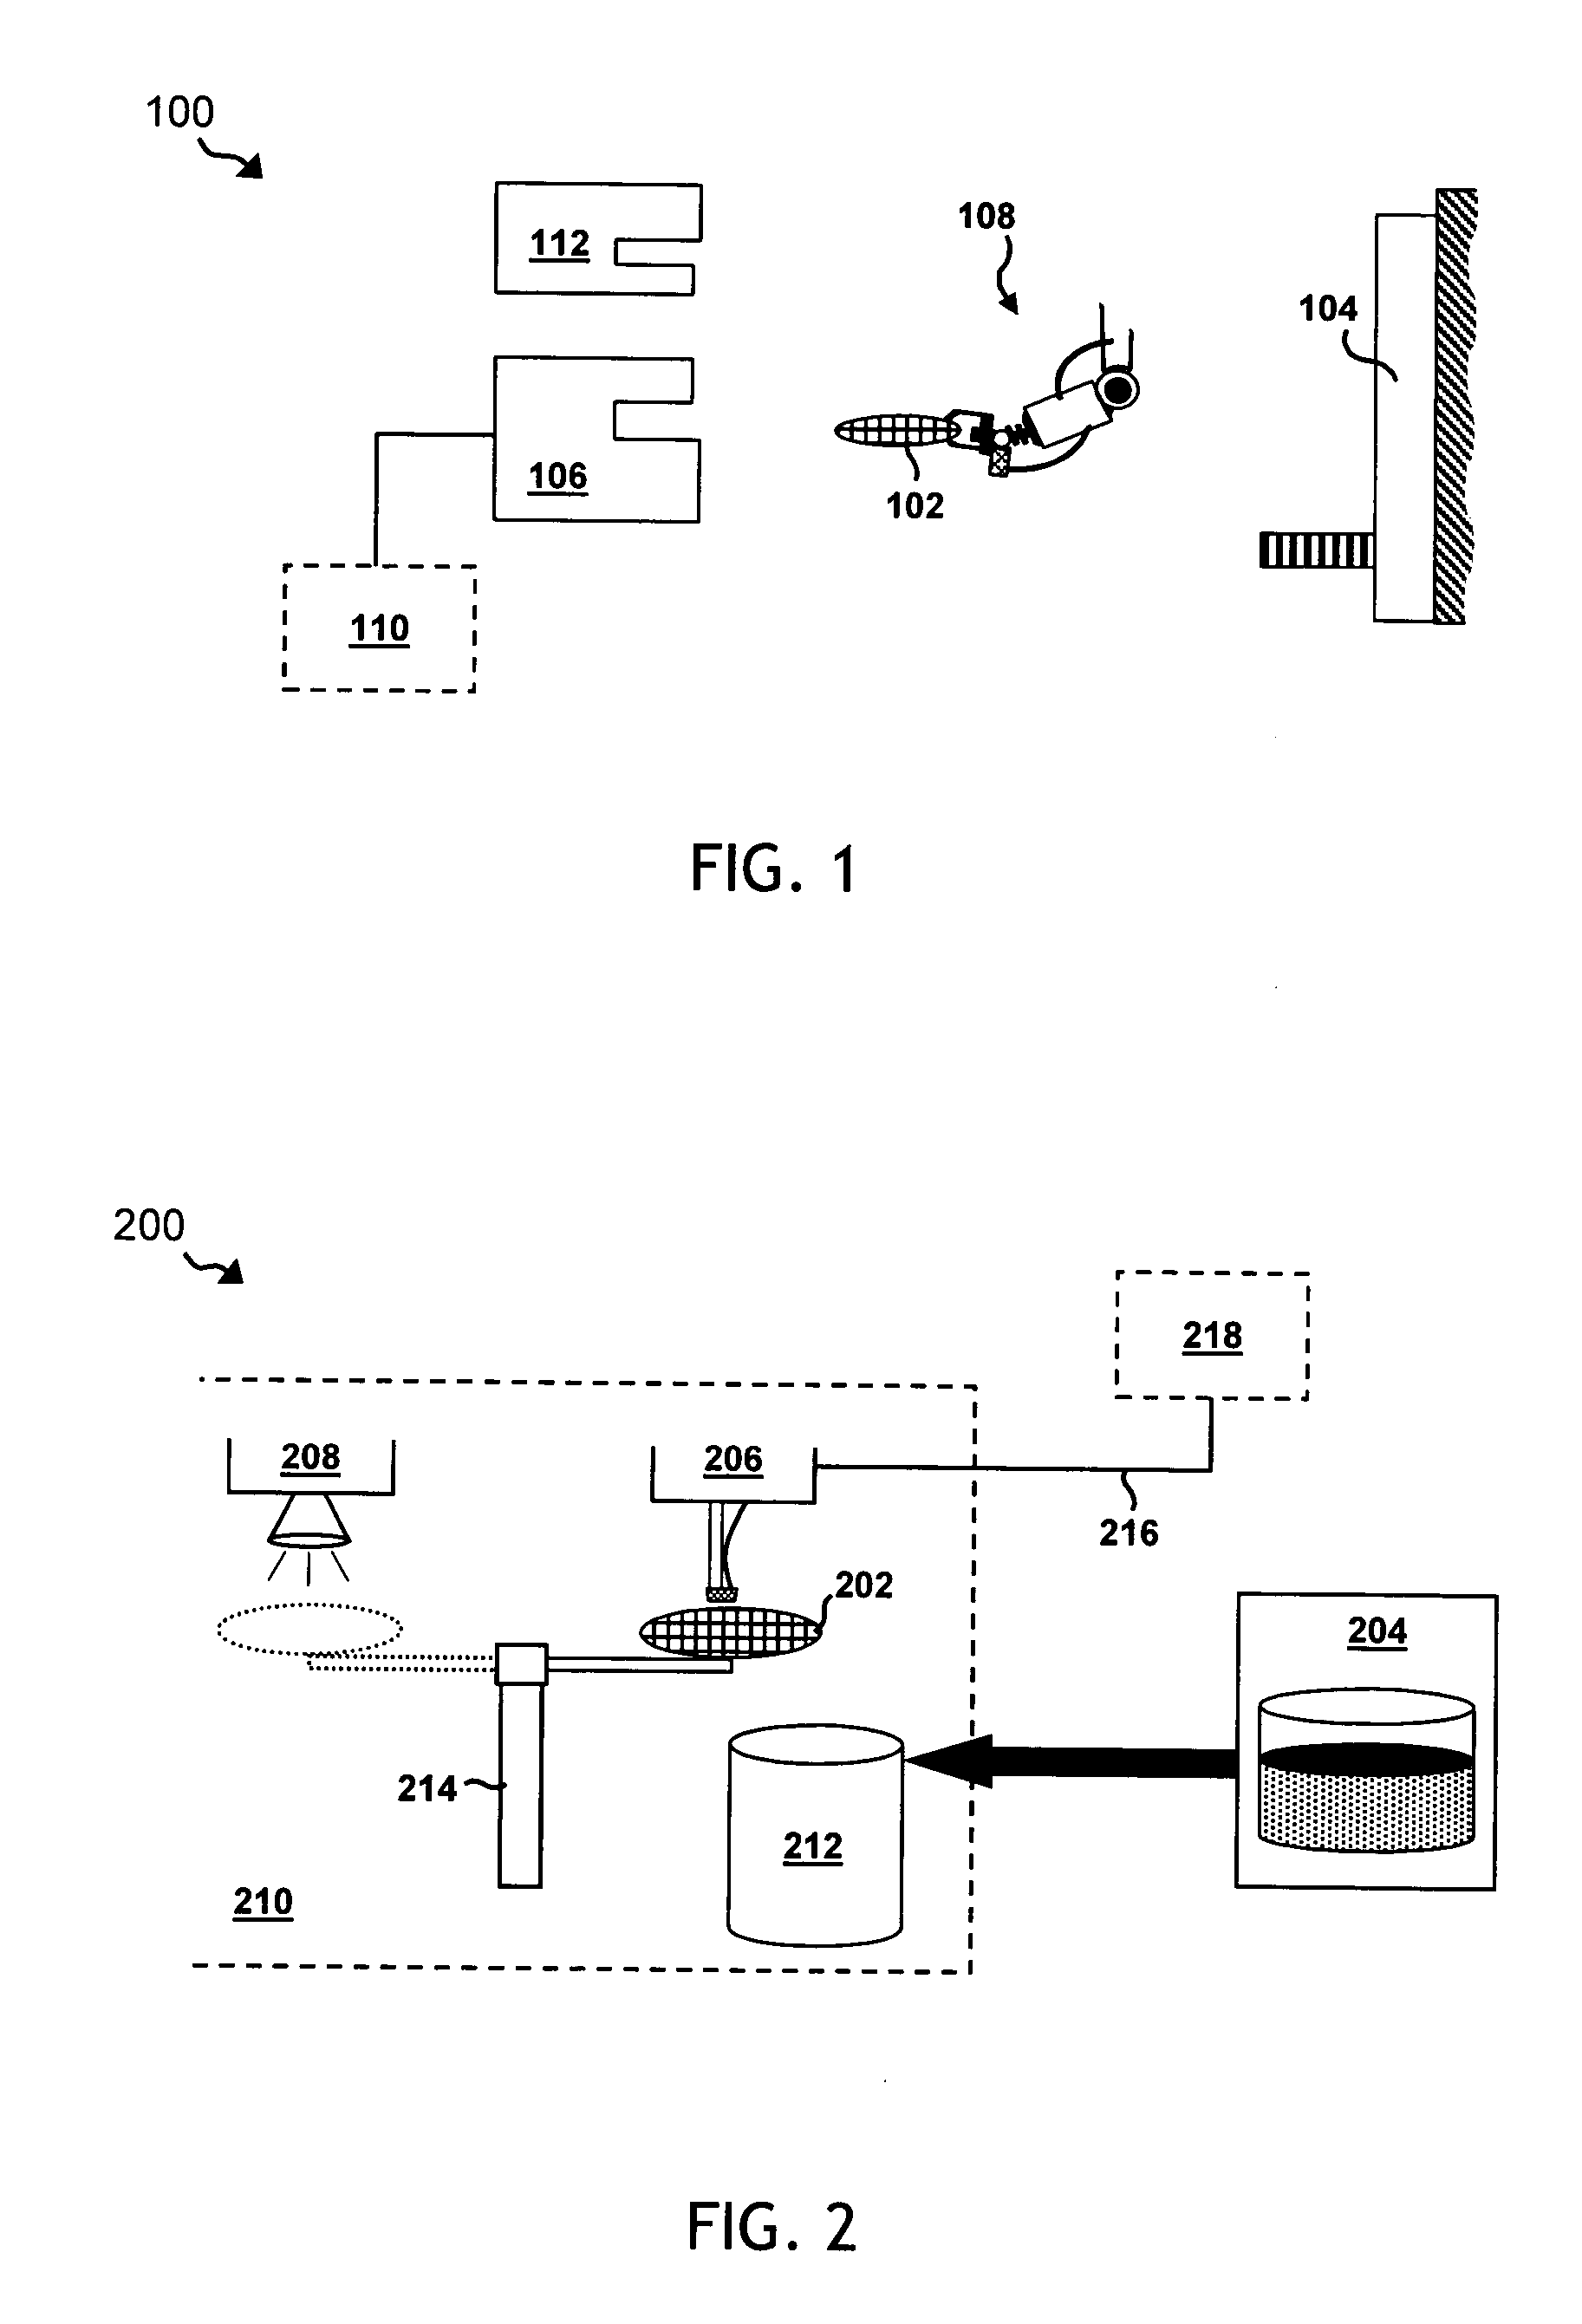 System for remediating cross contamination in semiconductor manufacturing processes